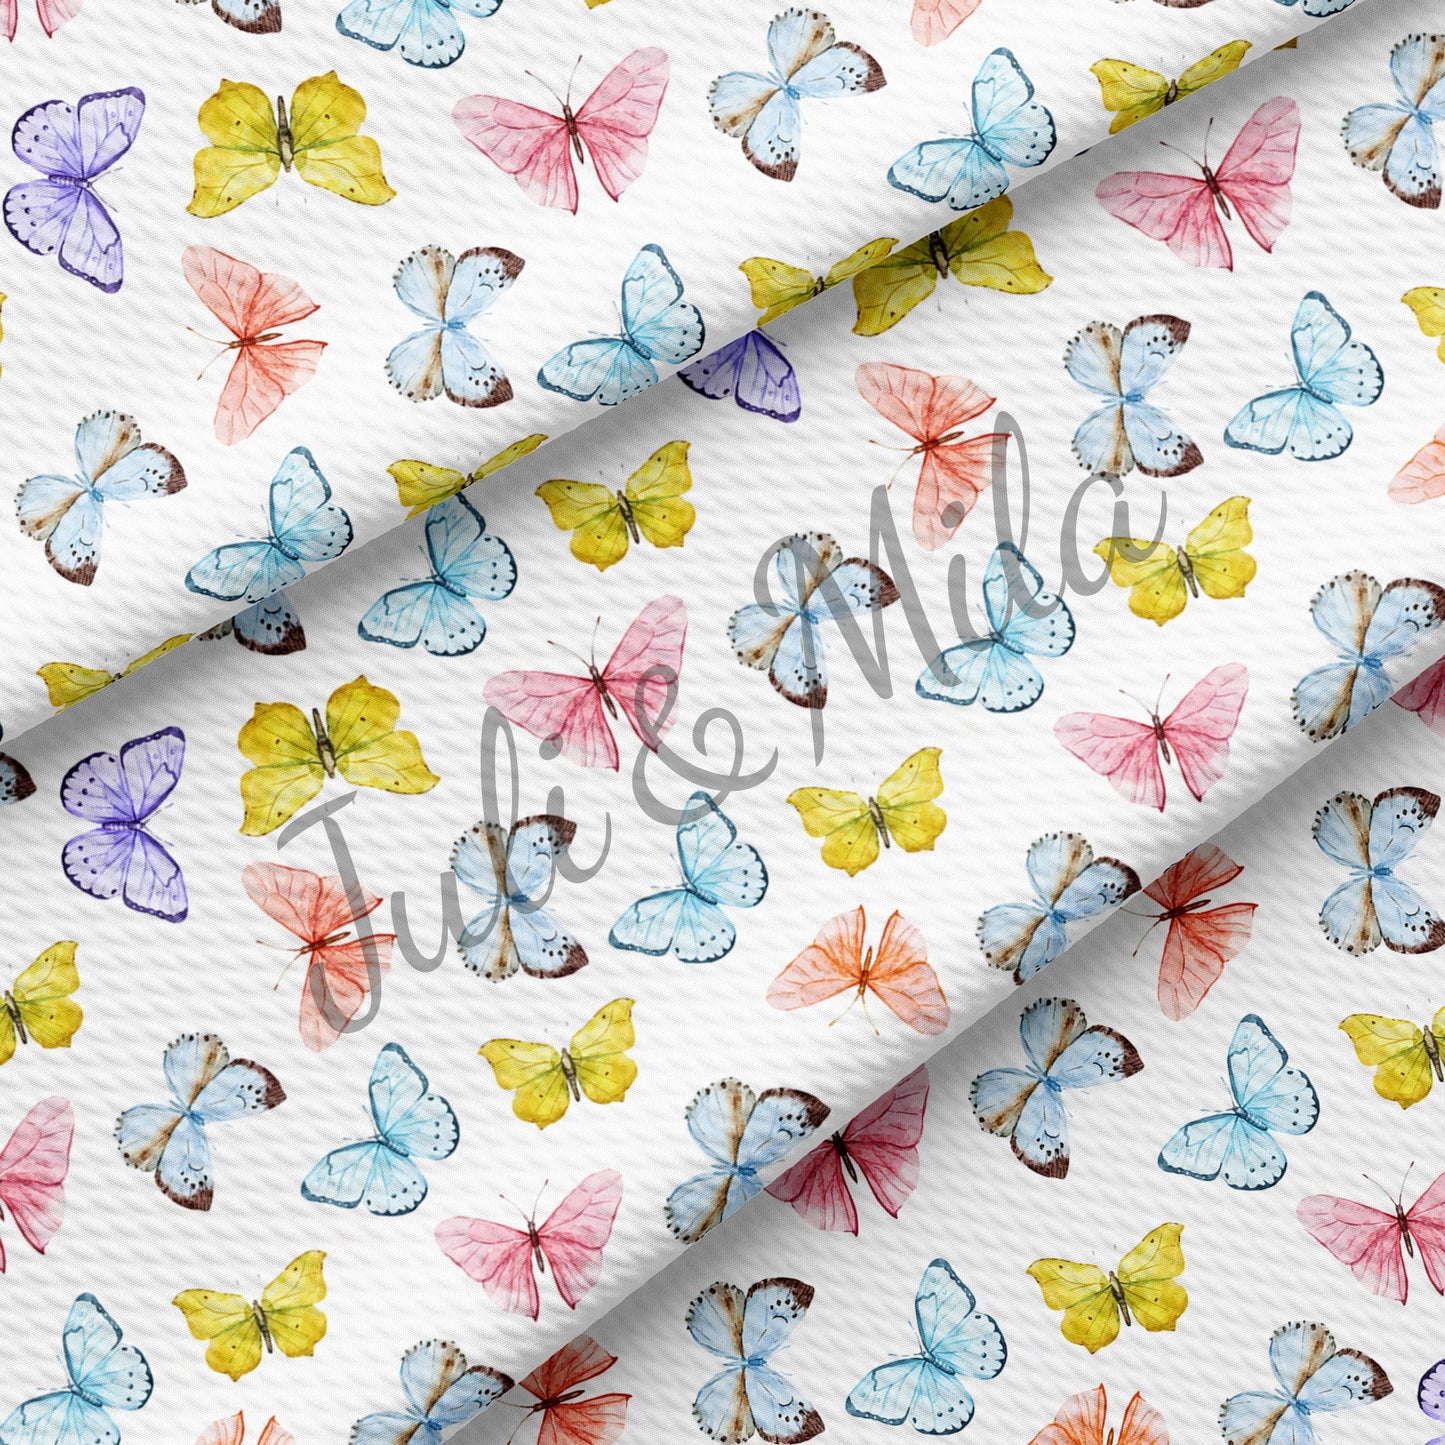 Easter Printed Liverpool Bullet Textured Fabric by the yard 4 Way Stretch Solid Strip Thick Liverpool Fabric Egg Bunny Pastel(E33)